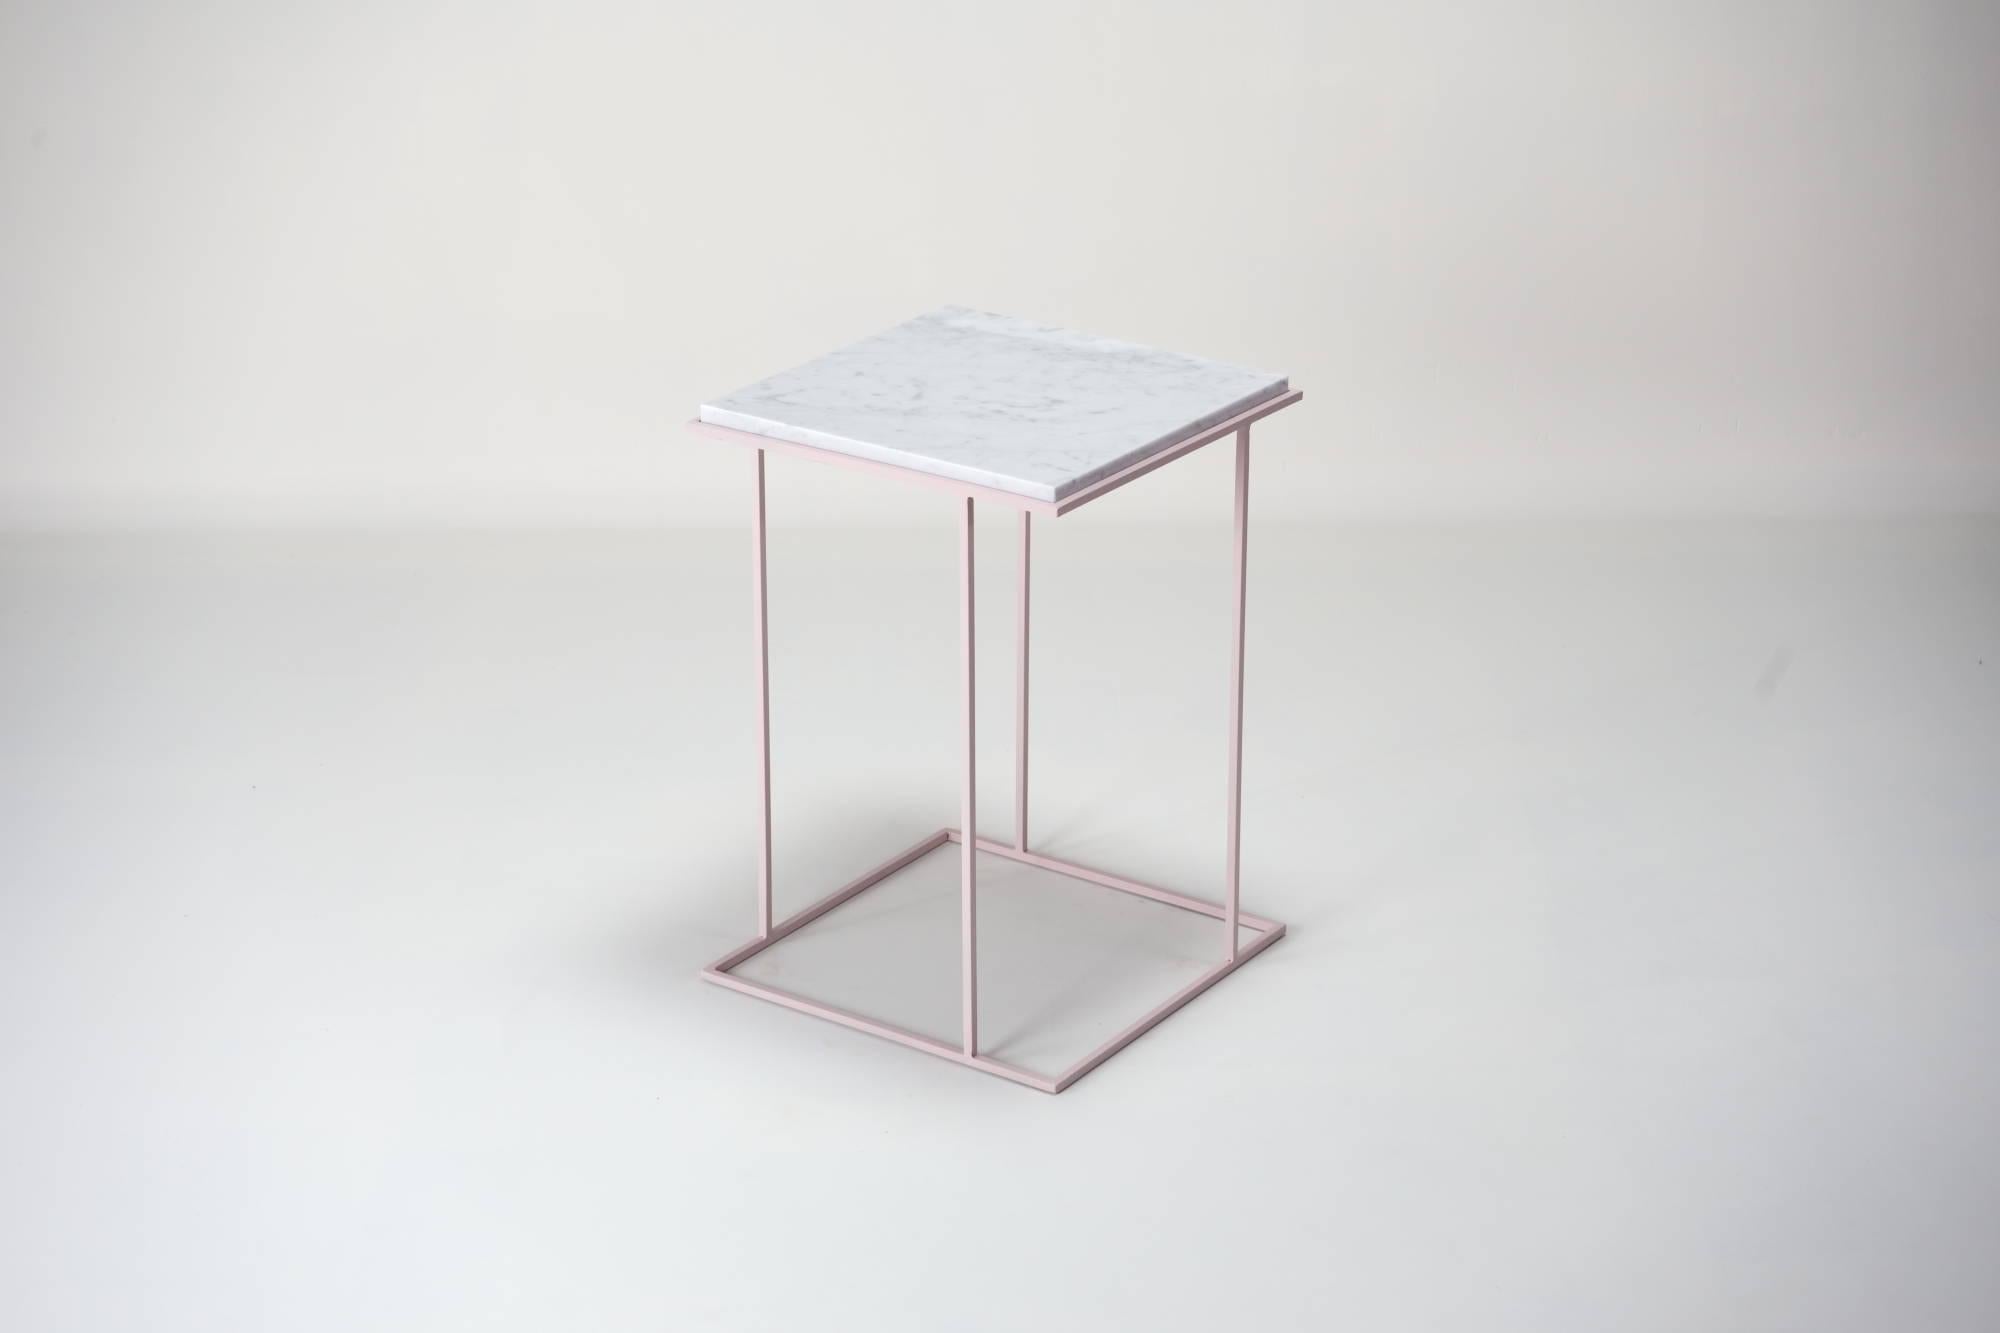 FramE is a side table designed with the intention of valuing the marble/stone top. 

The leg structure is intended as a 3D Frame inspired by Piet Mondrian paintings.

It comes in different varieties. In this case we used the beautiful Carrara